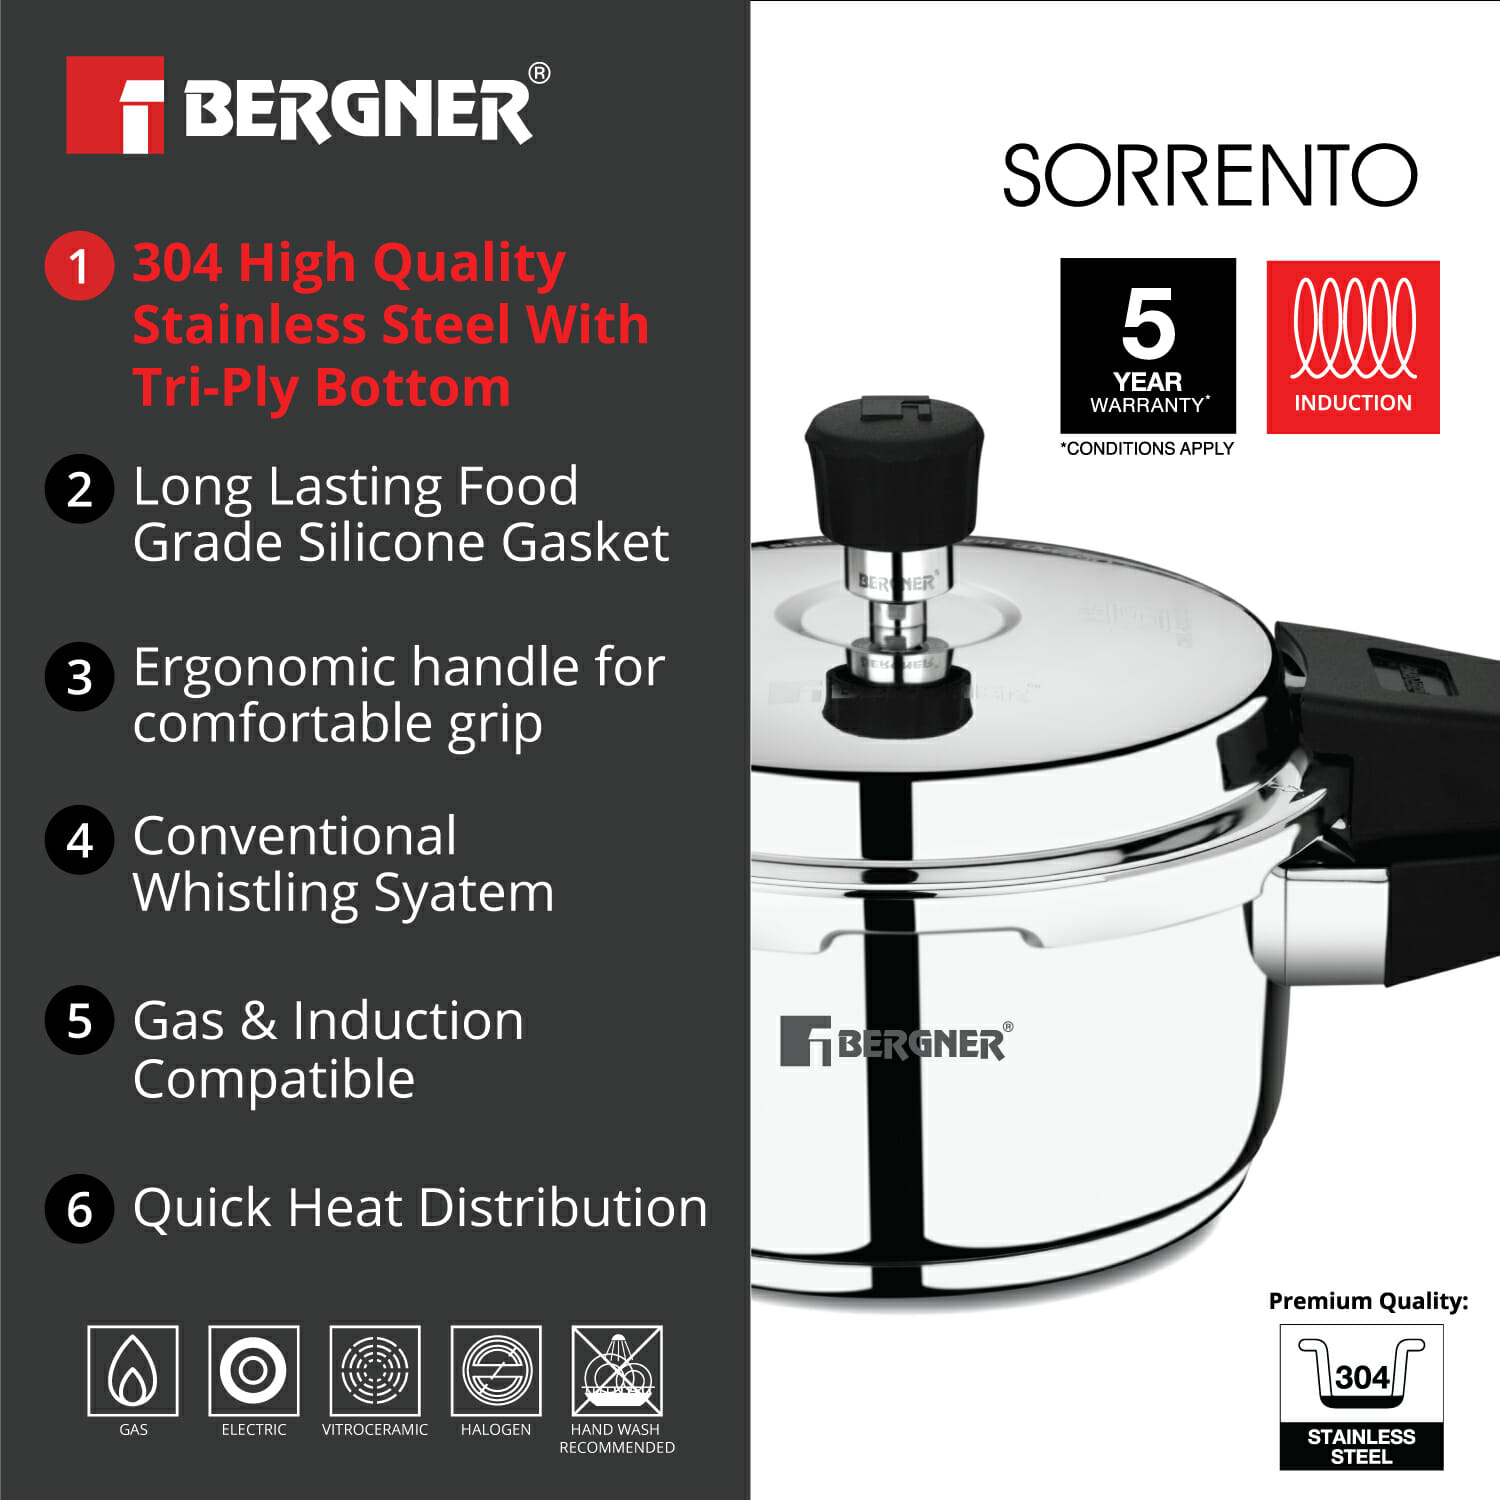 Bergner Sorrento 2 Liters Stainless Steel Pressure Cooker with Outer Lid and Triply Bottom